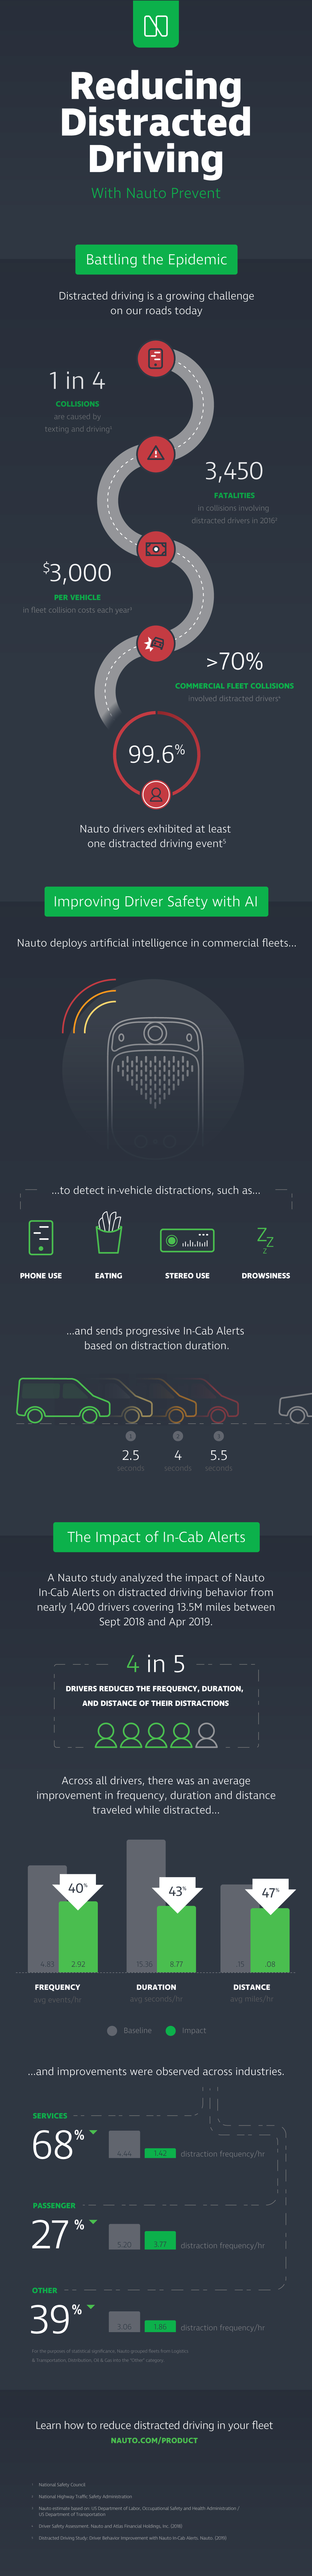 Nauto Study Finds Drivers Decreased Distraction — Frequency, Duration, Distance — by Over 40 Percent with Help from AI
